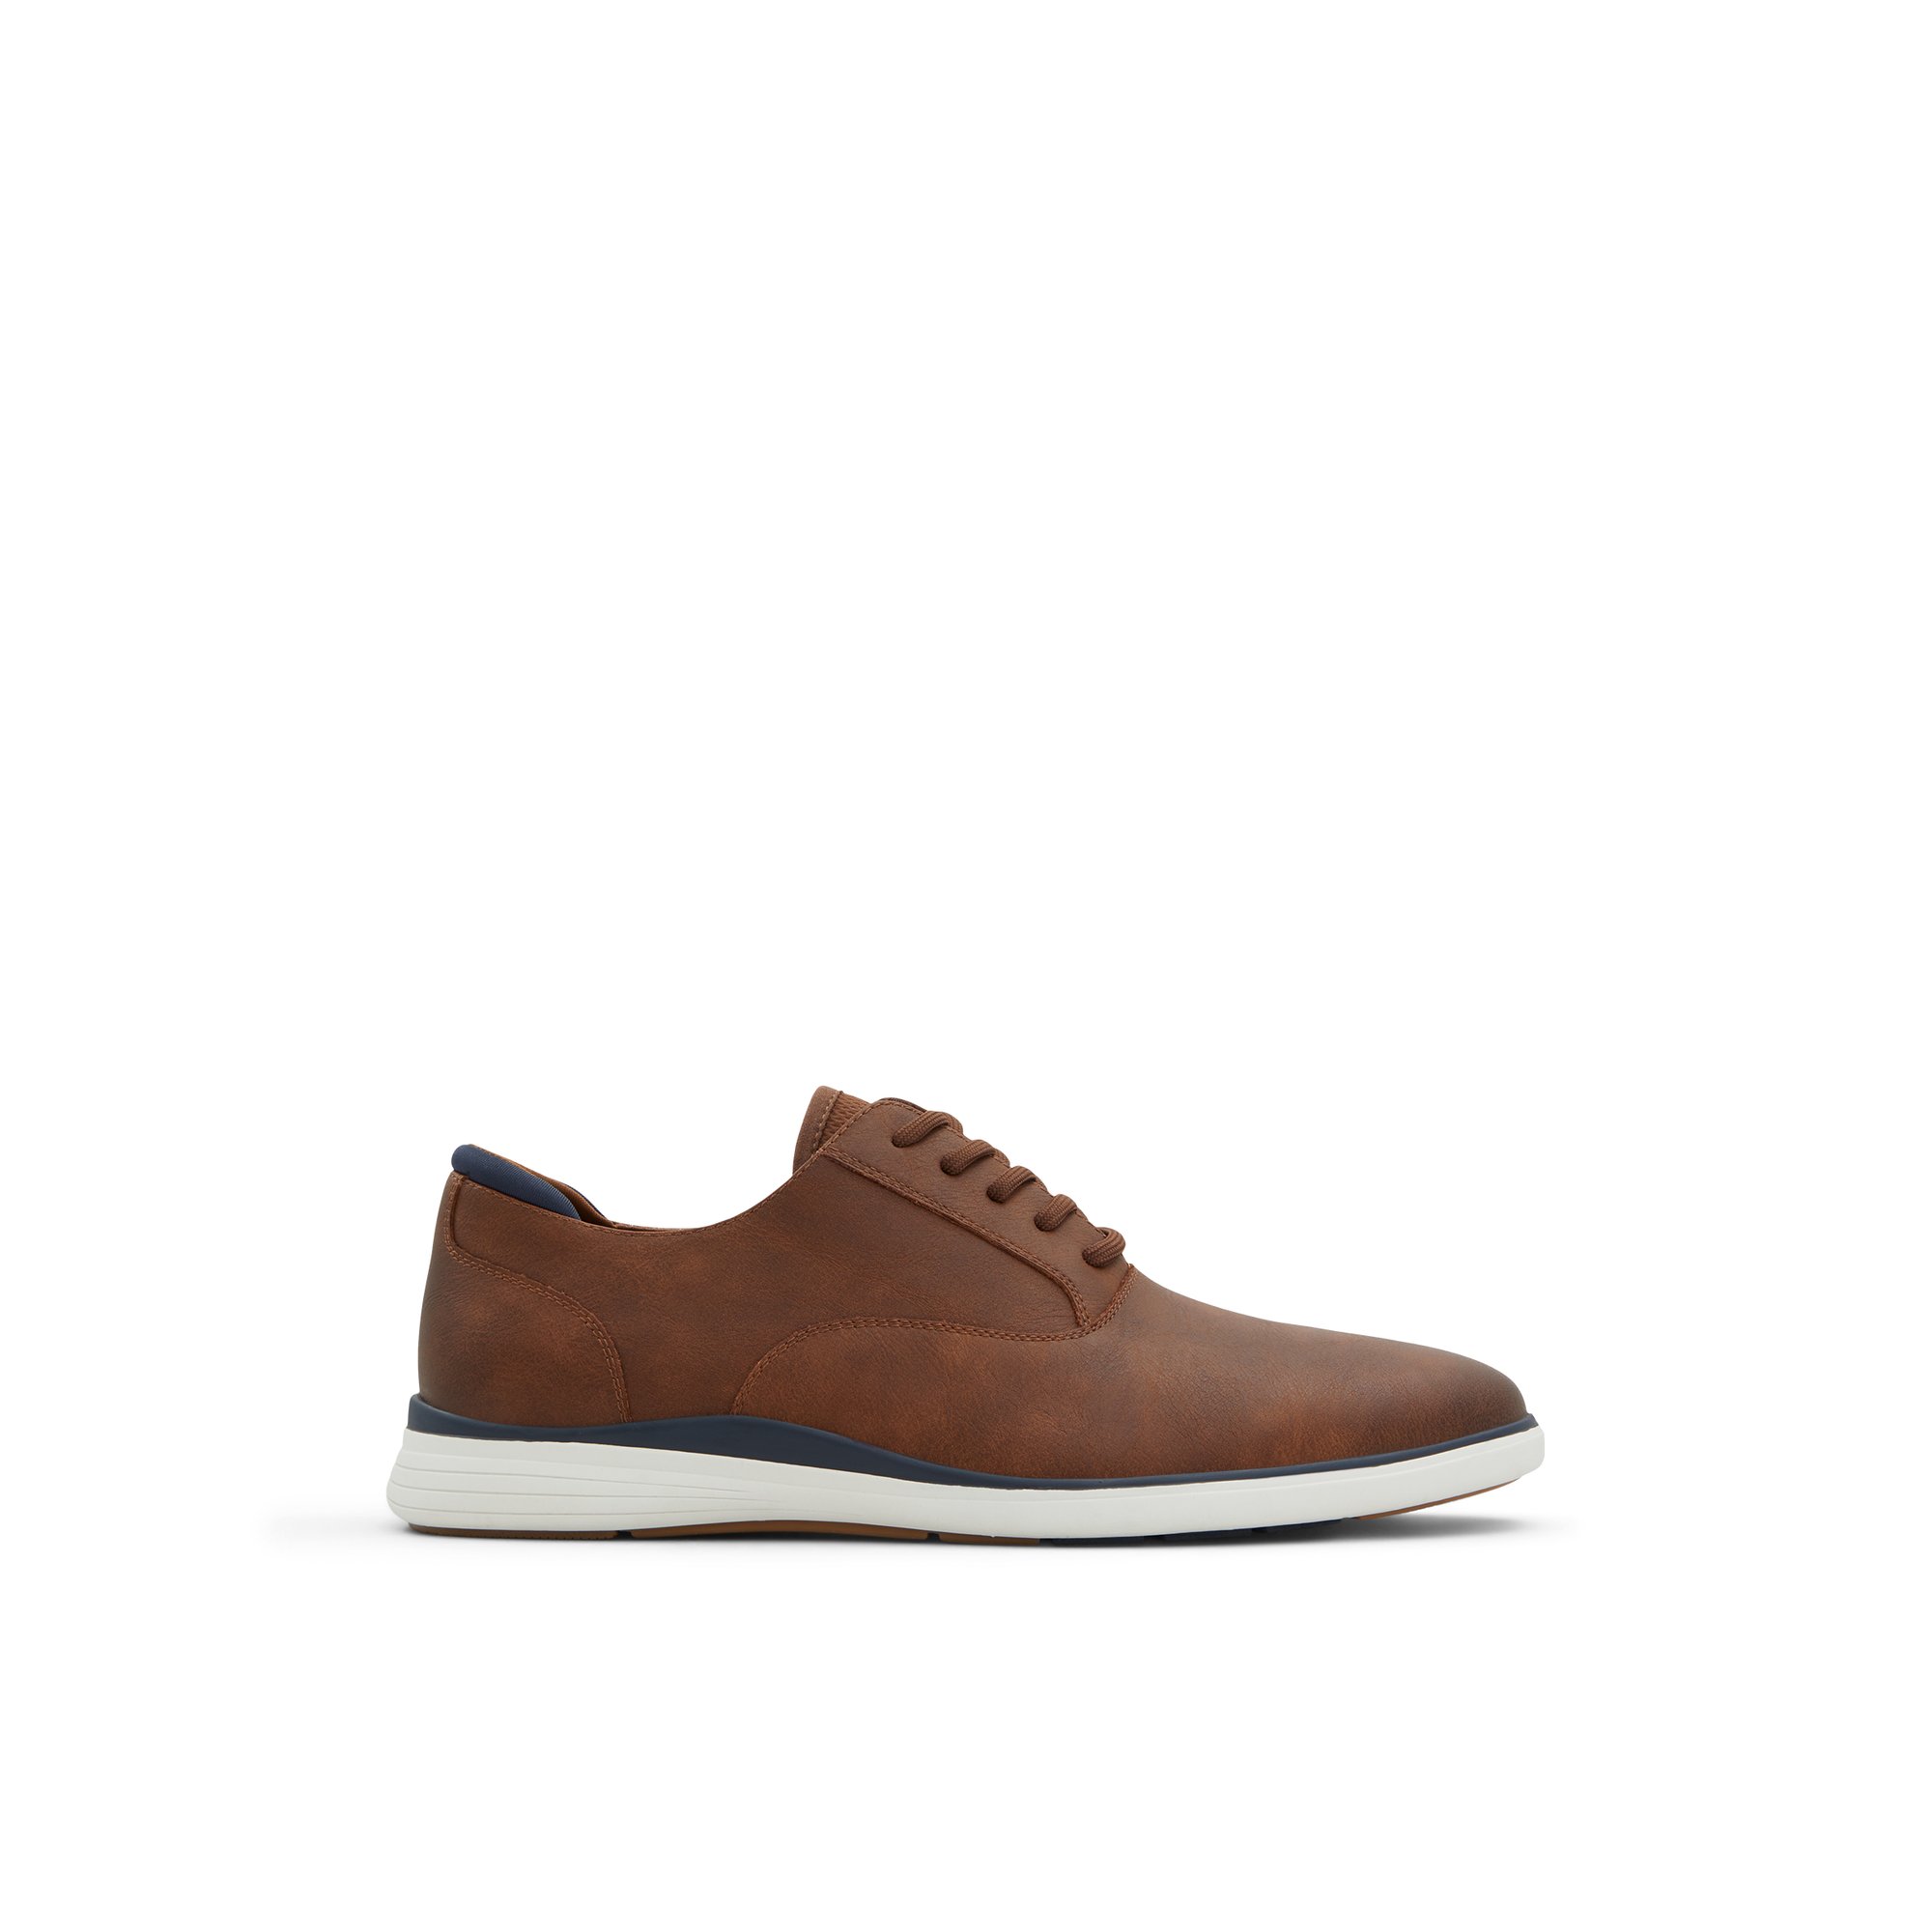 ALDO Seymour - Men's Oxfords and Lace up - Brown